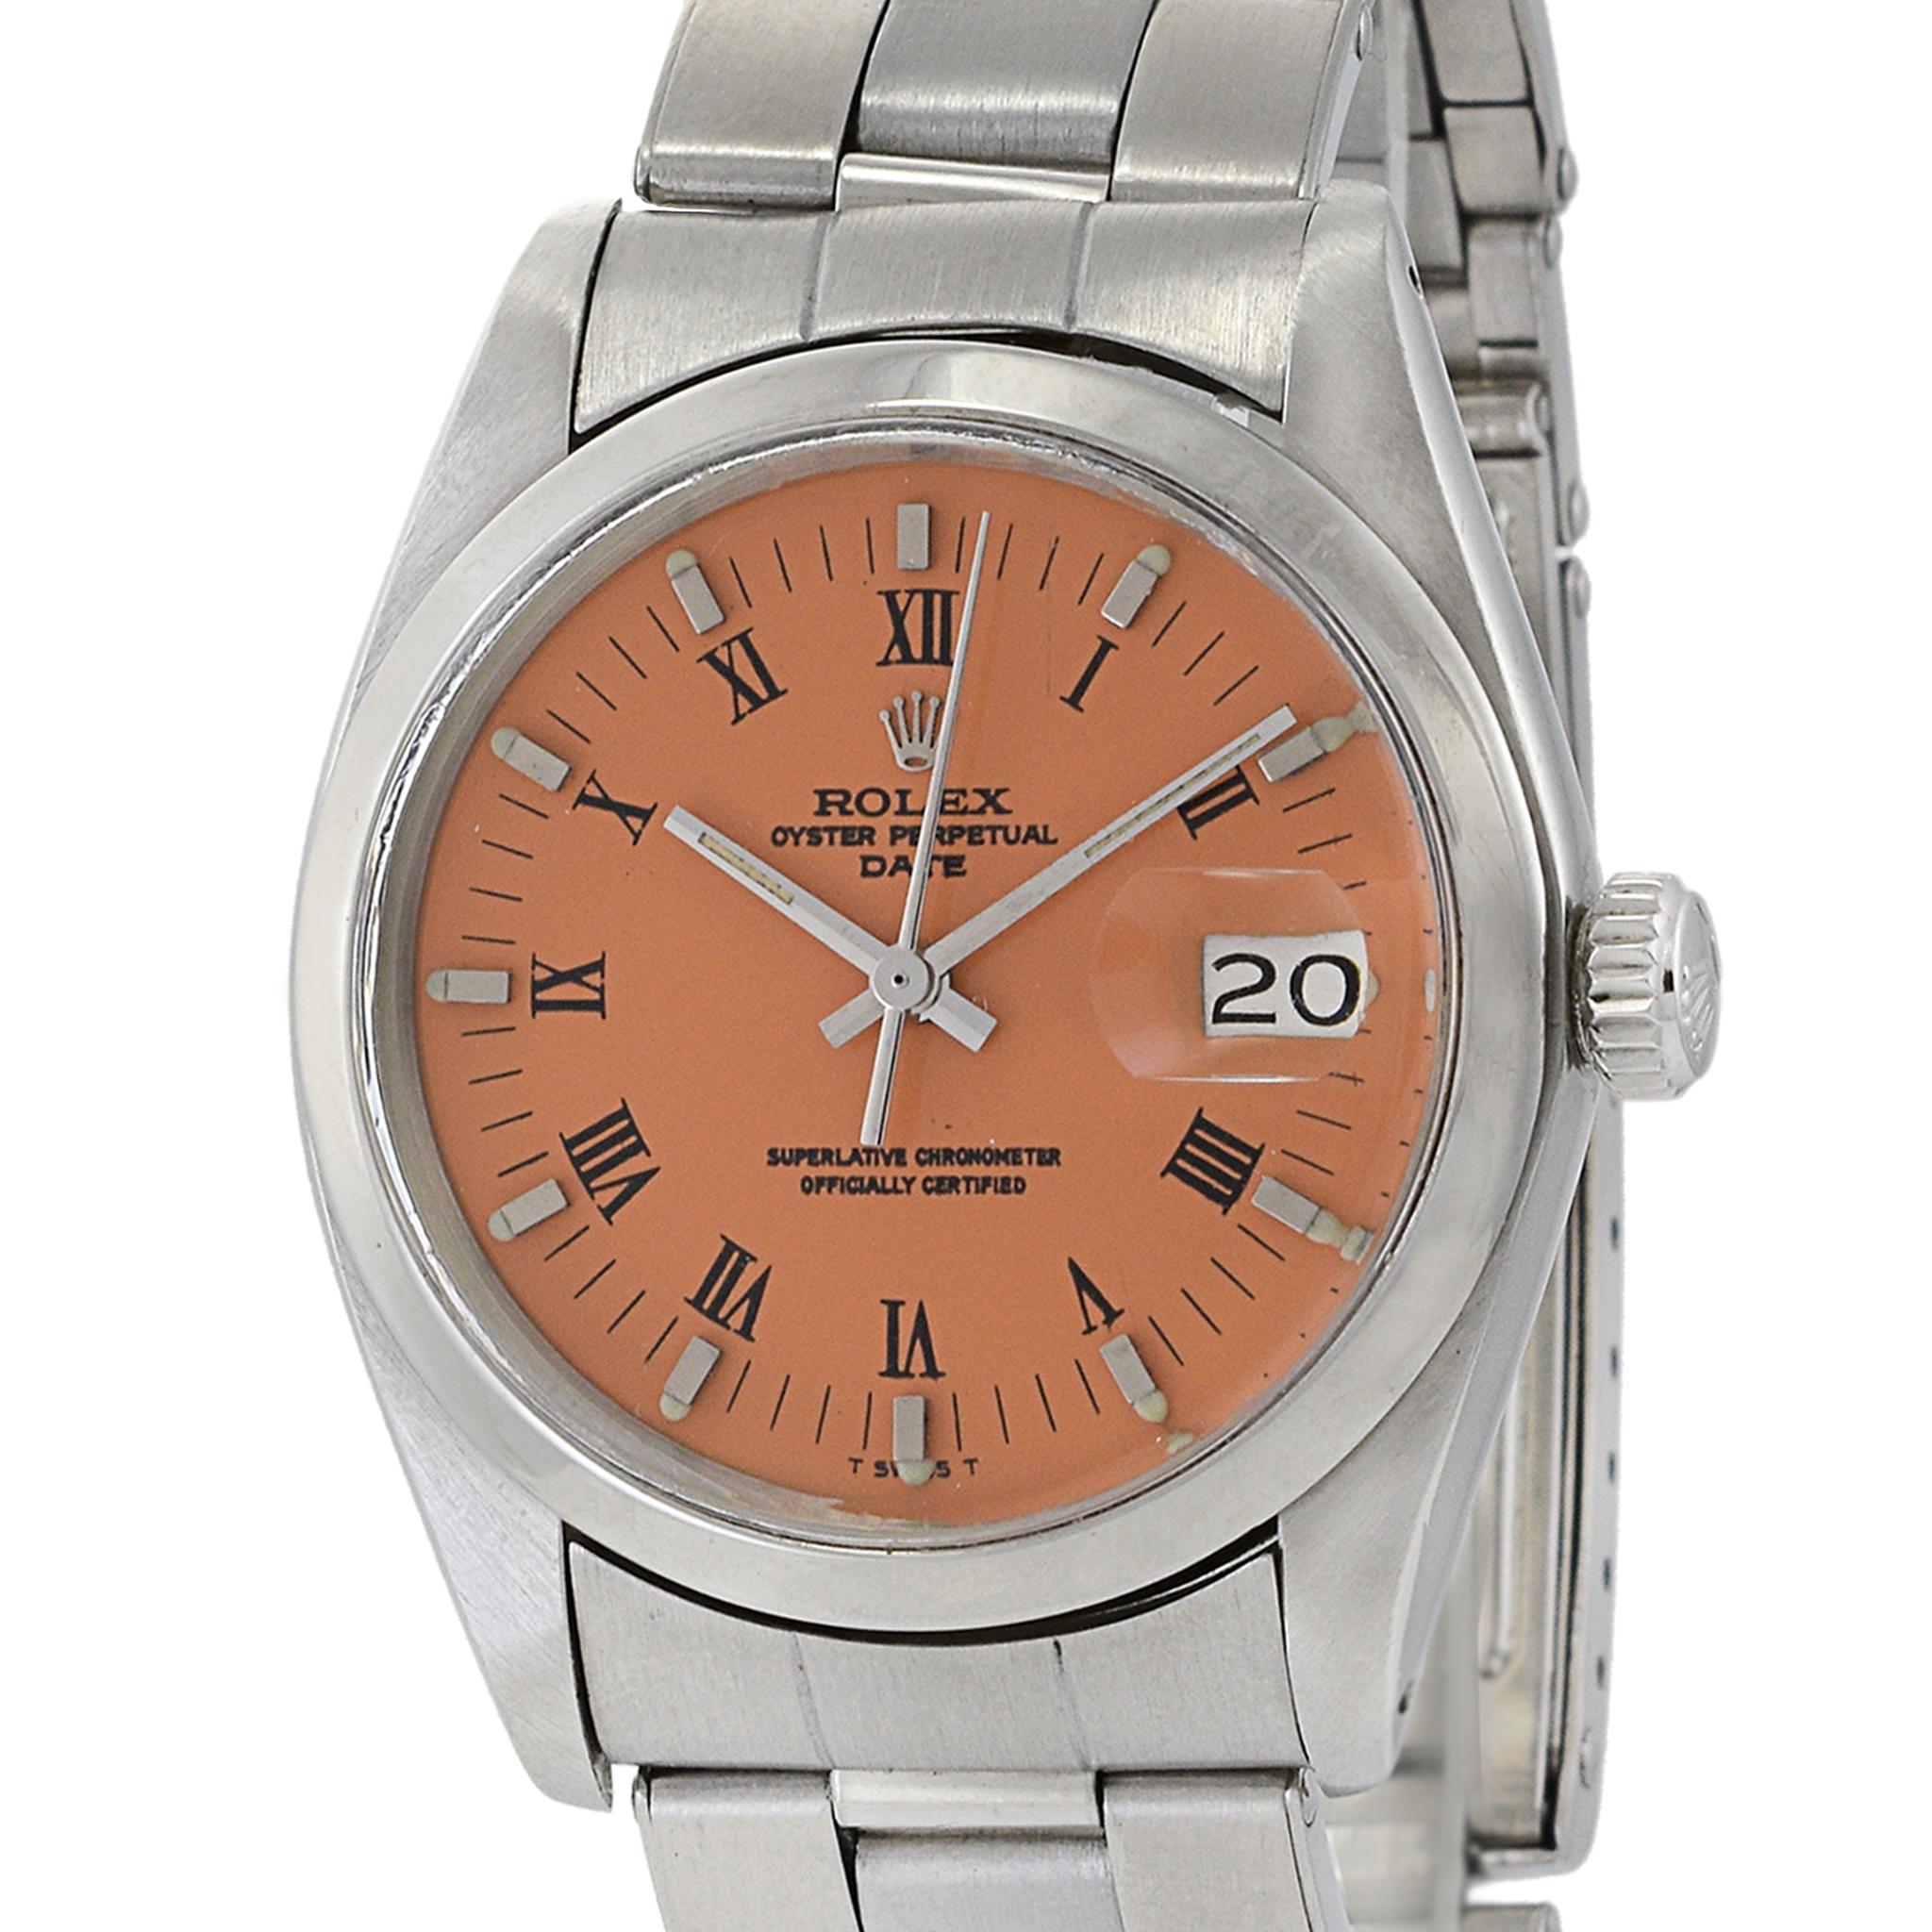 Rolex Oyster Perpetual Date Reference 1500 In Good Condition For Sale In New York, NY